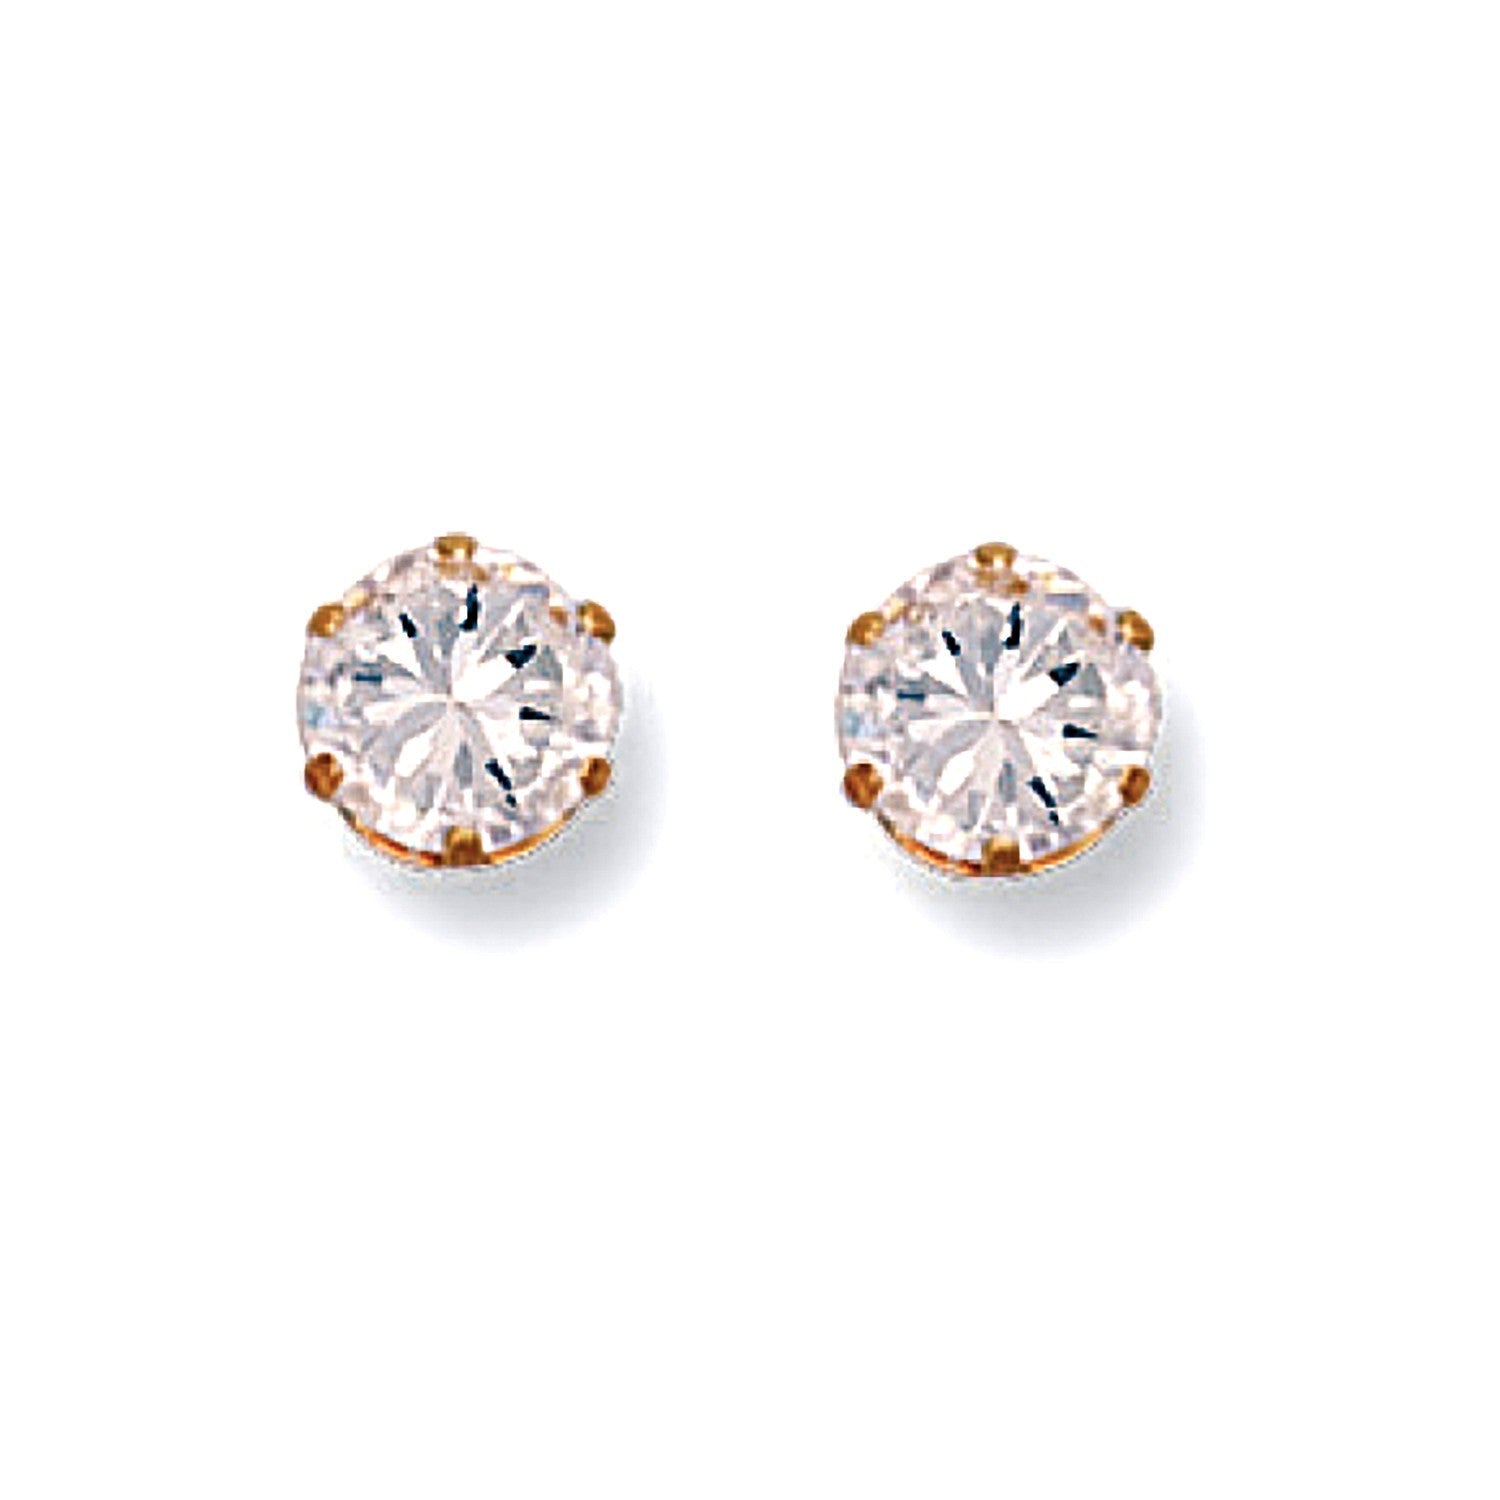 9ct Yellow Gold 6mm Claw Set Cz Studs - FJewellery